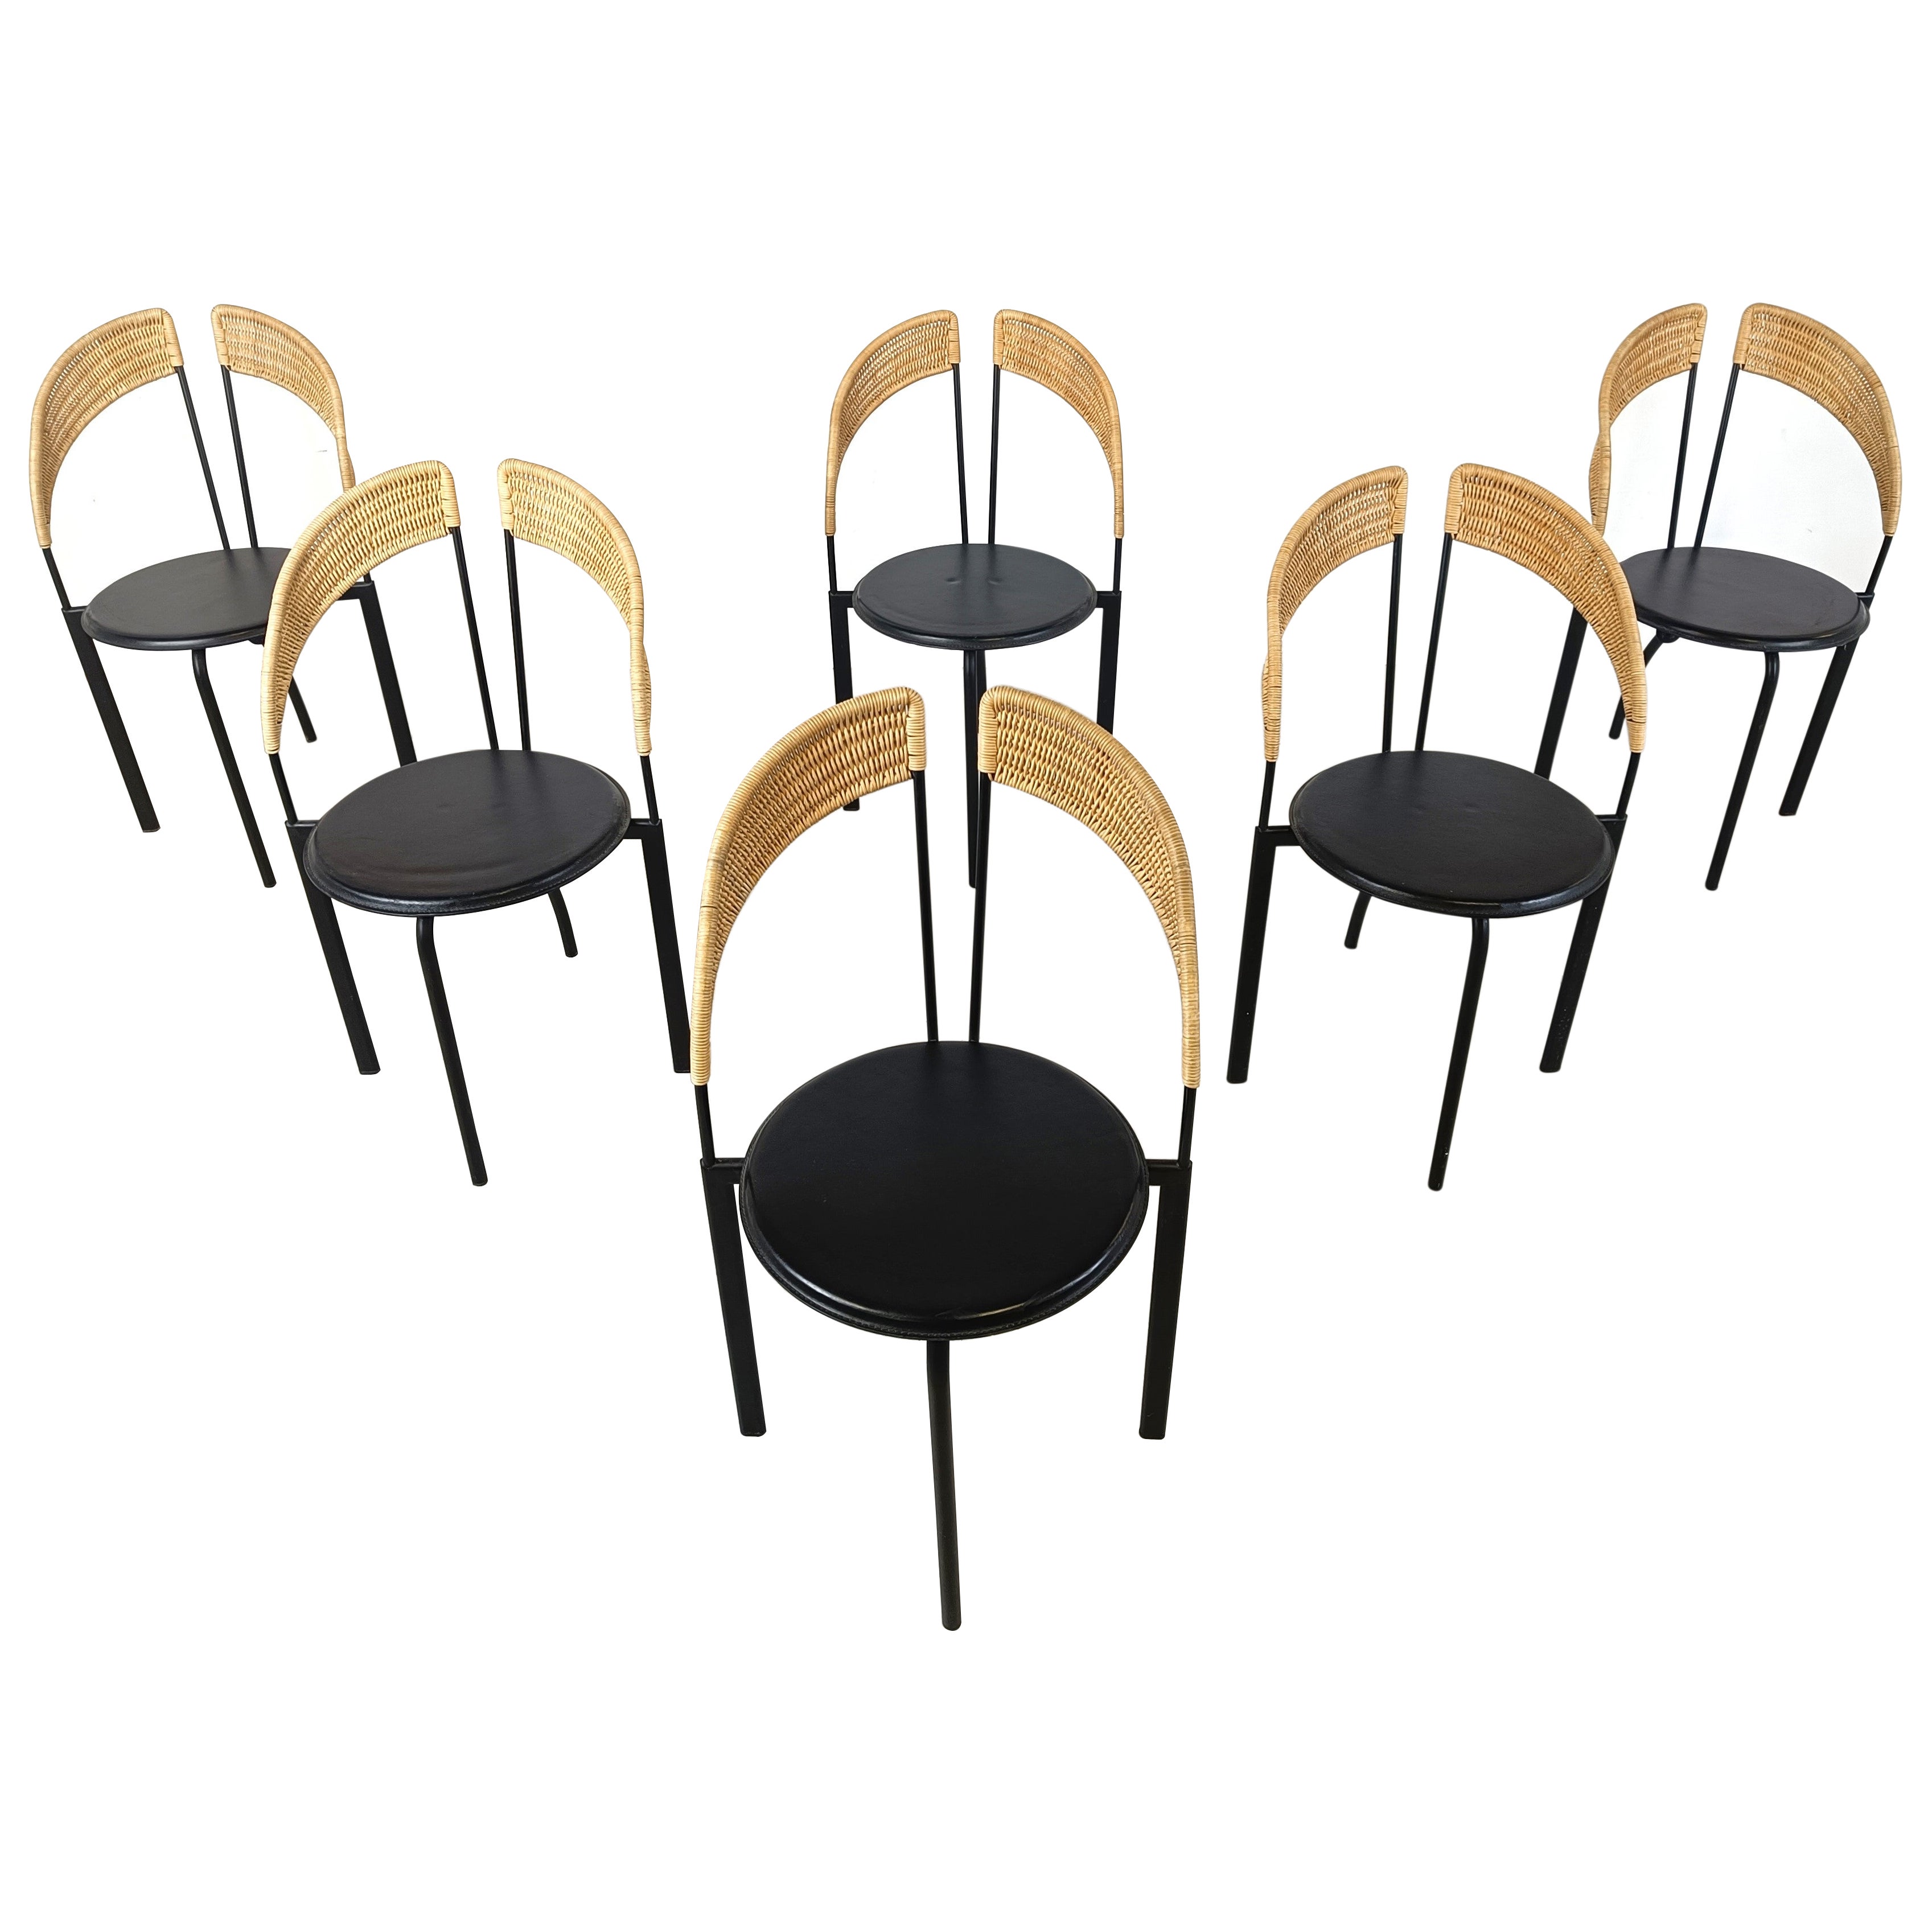 Set of 6 italian postmodern wicker and metal dining chairs, 1980s For Sale